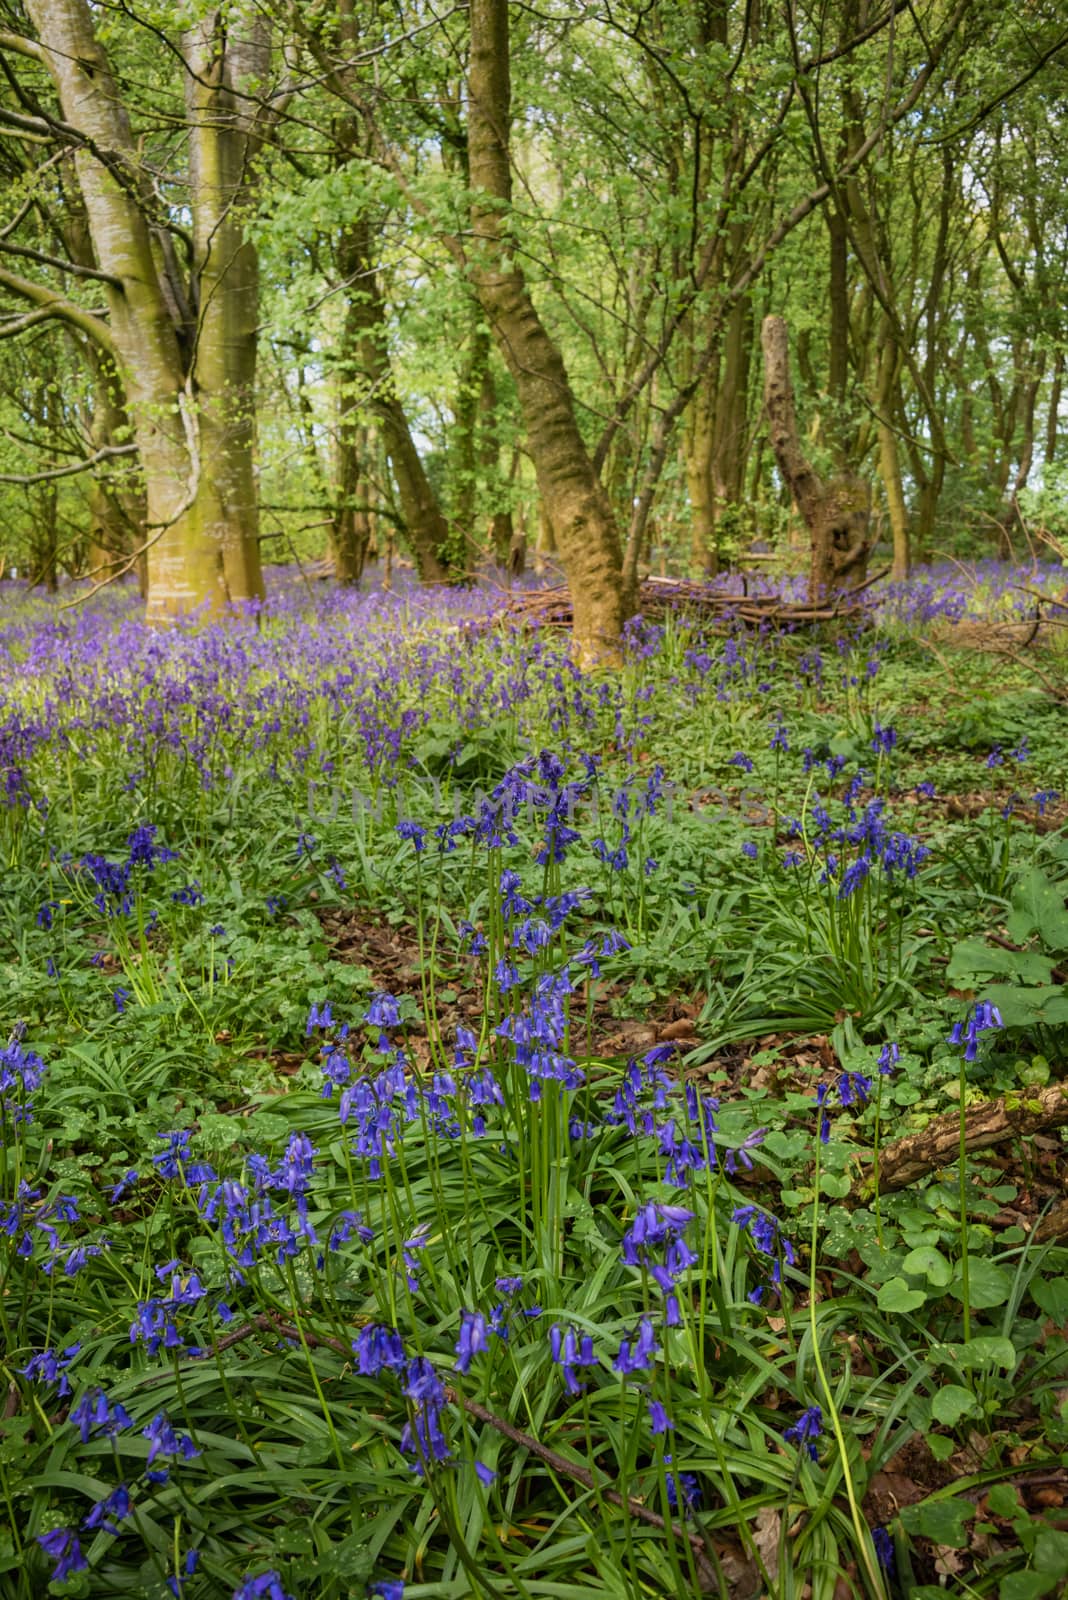 Bluebell carpeted Forest Floor by stephenlavery